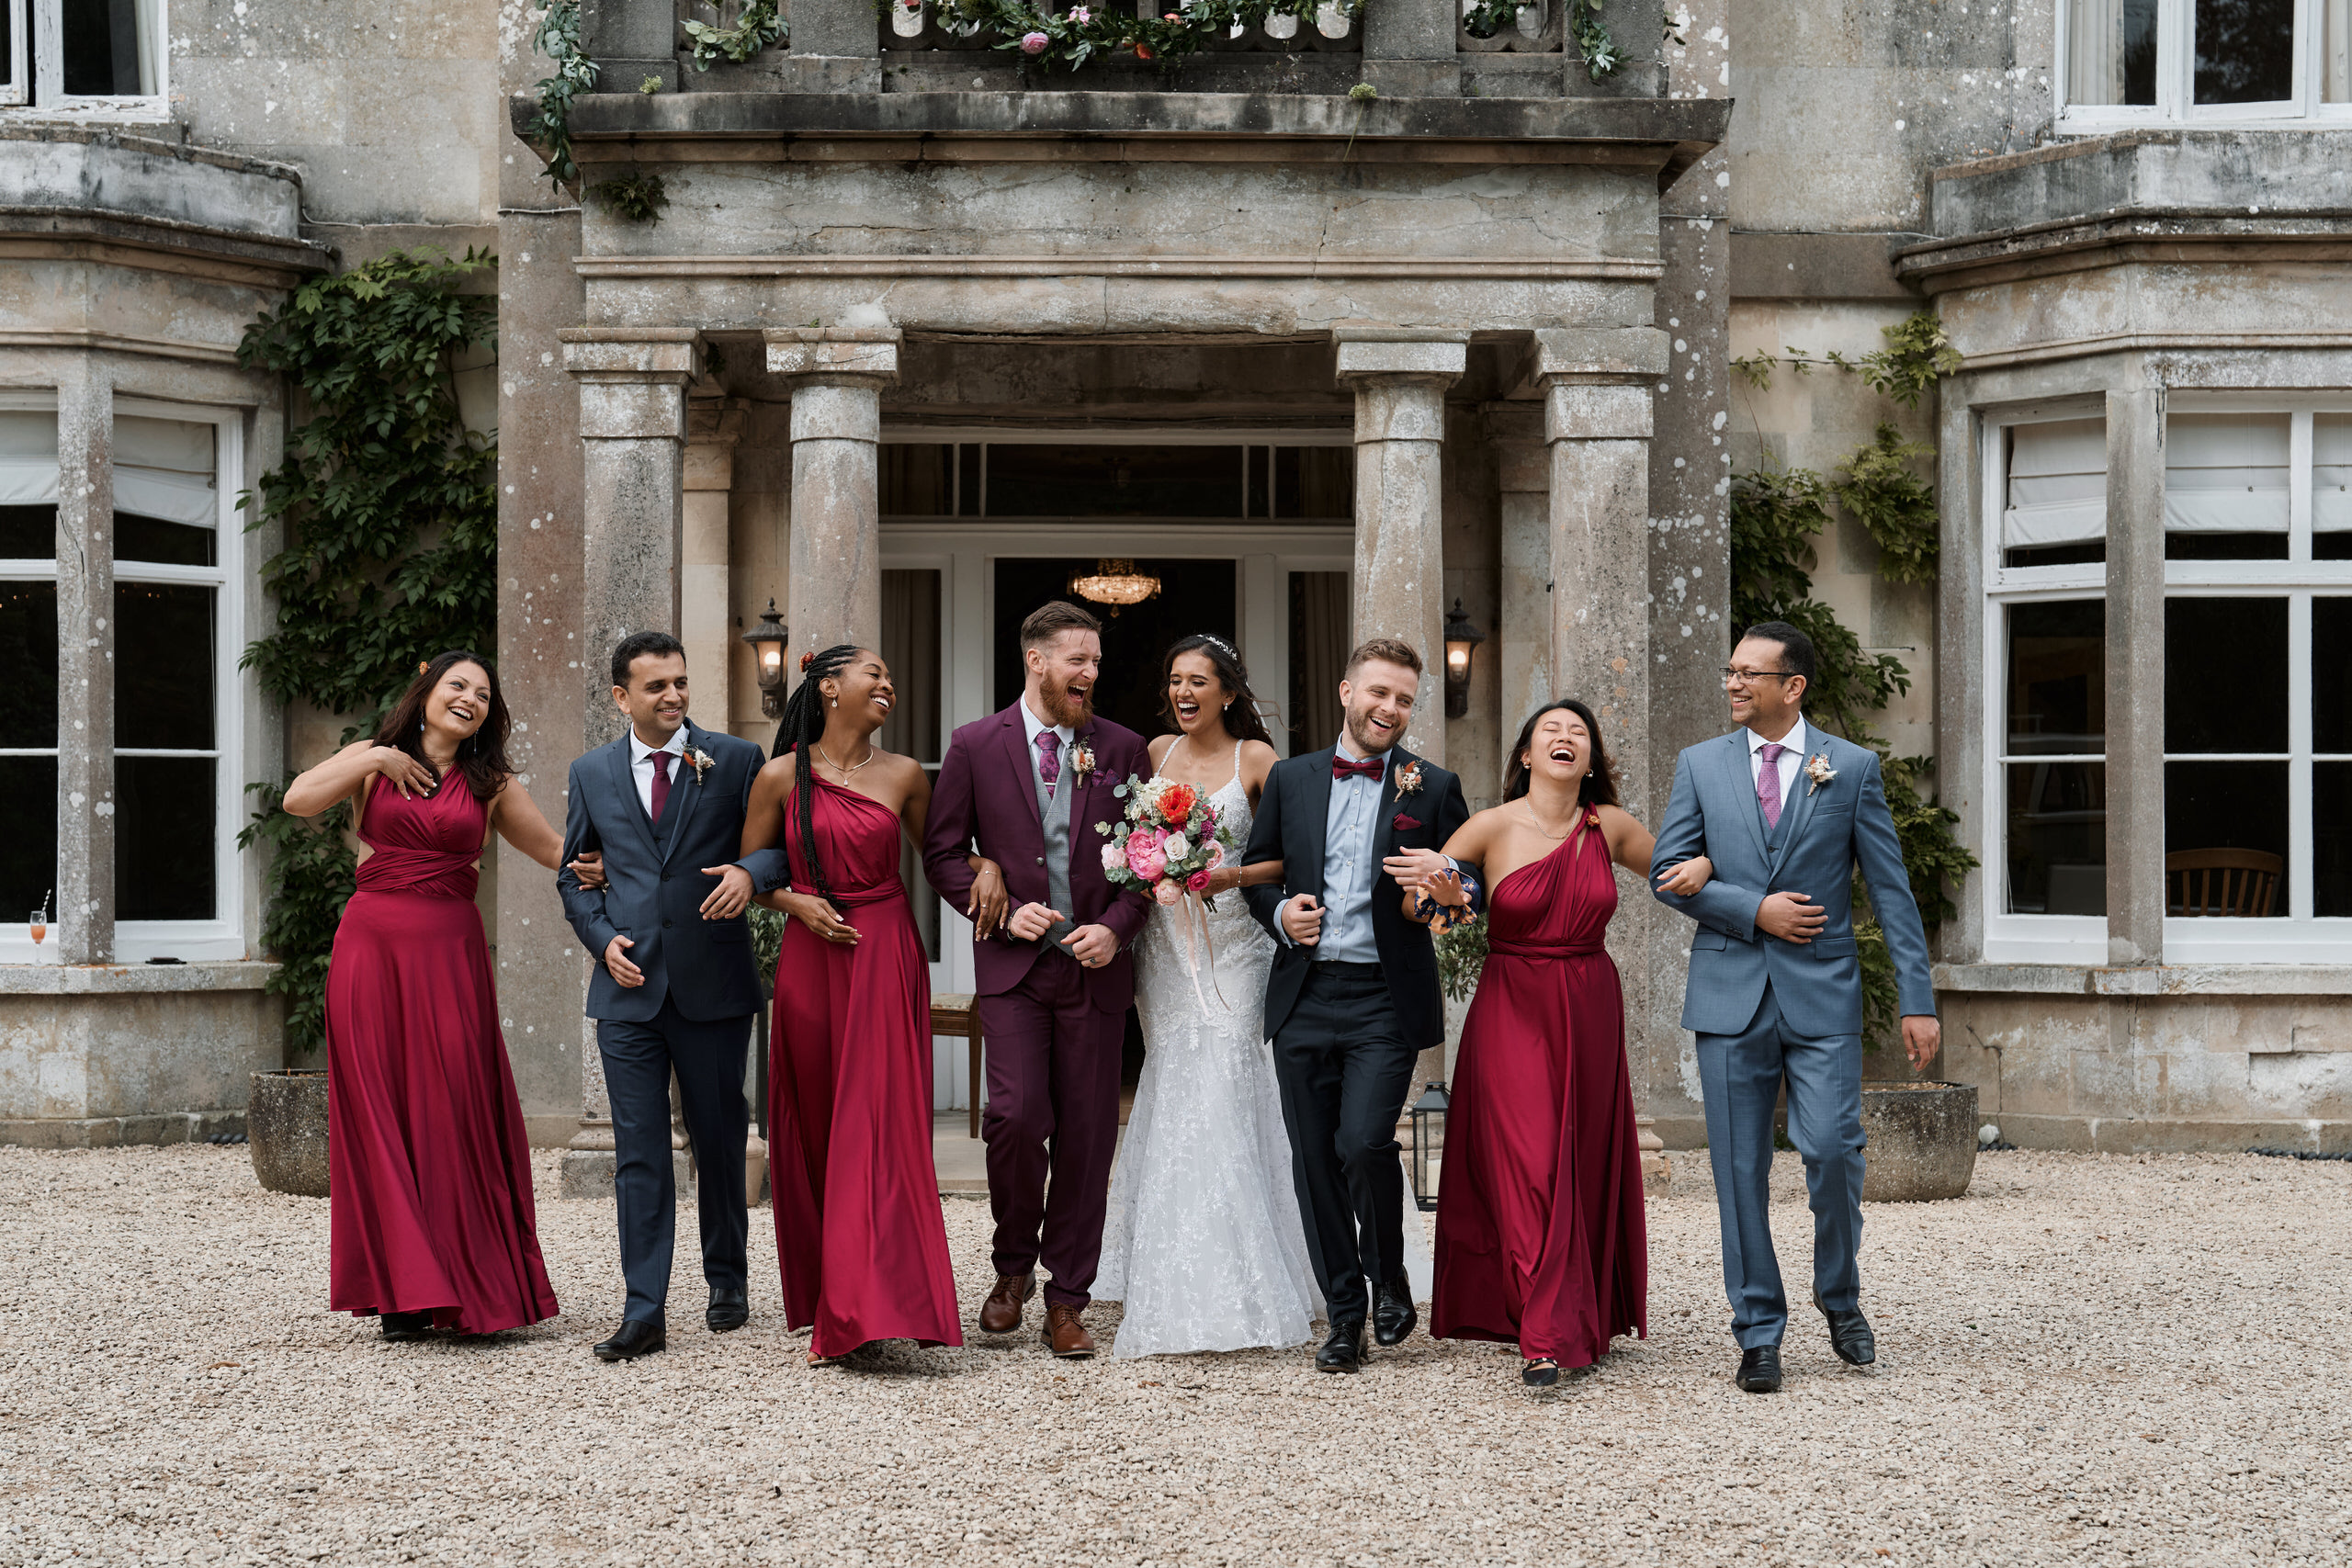 A bunch of bridesmaids and groomsmen are striking a pose in front of a big fancy house.